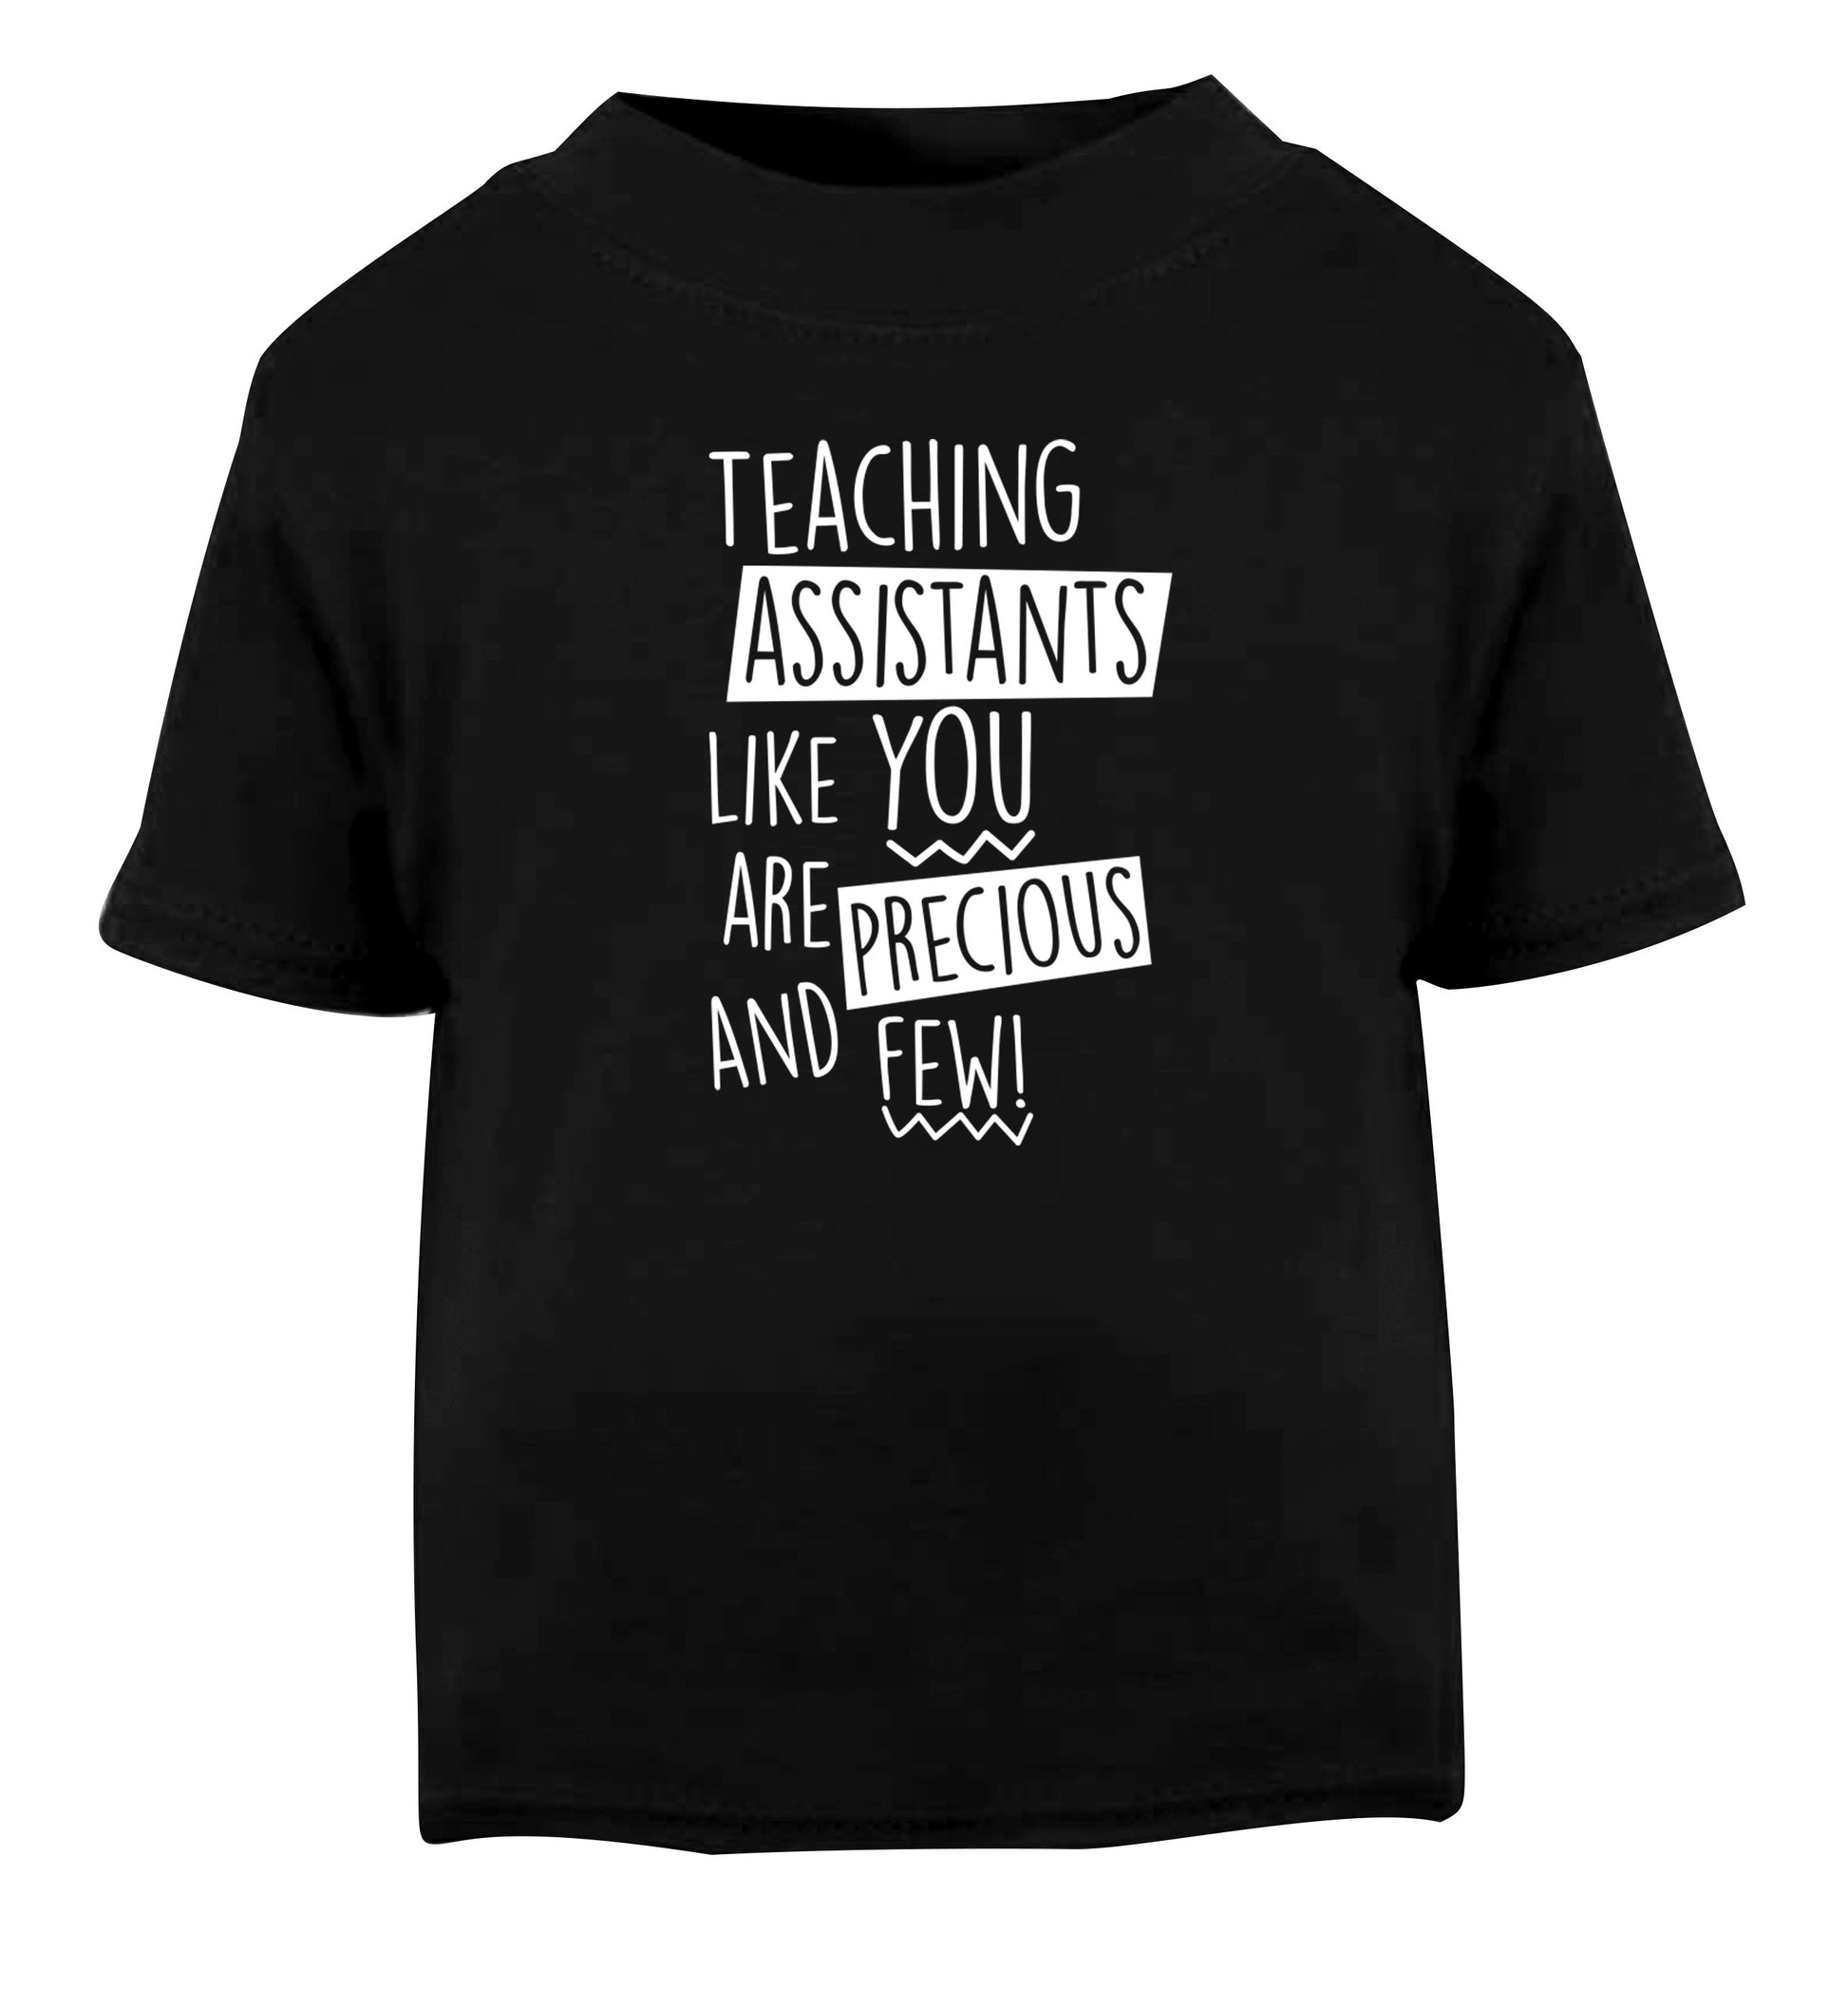 Teaching assistants like you are previous and few! Black Baby Toddler Tshirt 2 years